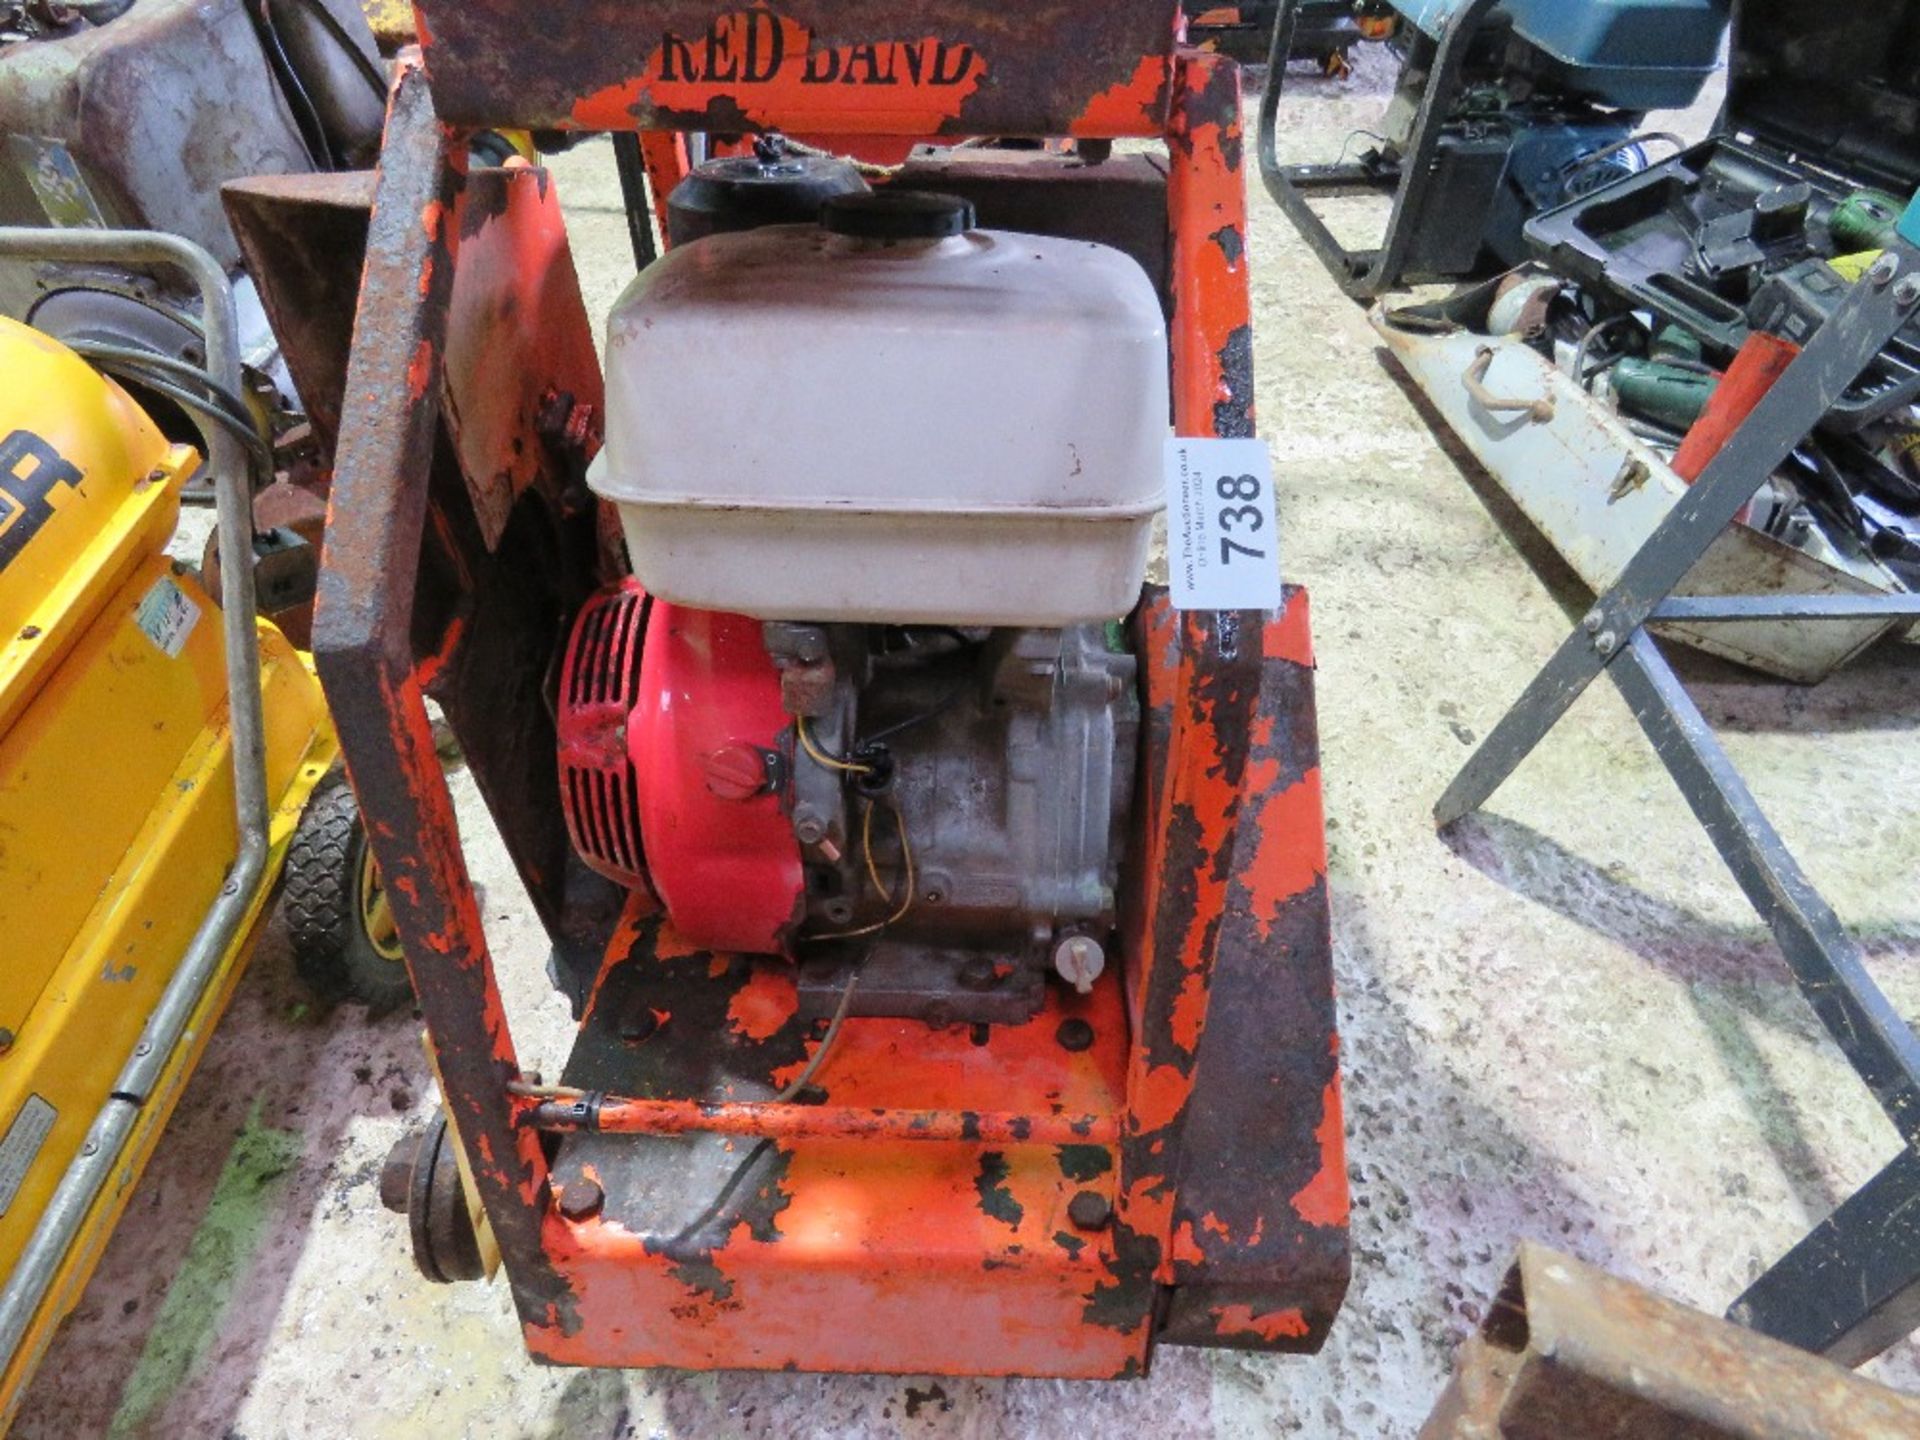 REDBAND FLOOR SAW WITH BLADE AND WATER TANK....SOURCED FROM DEPOT CLOSURE. - Image 3 of 6